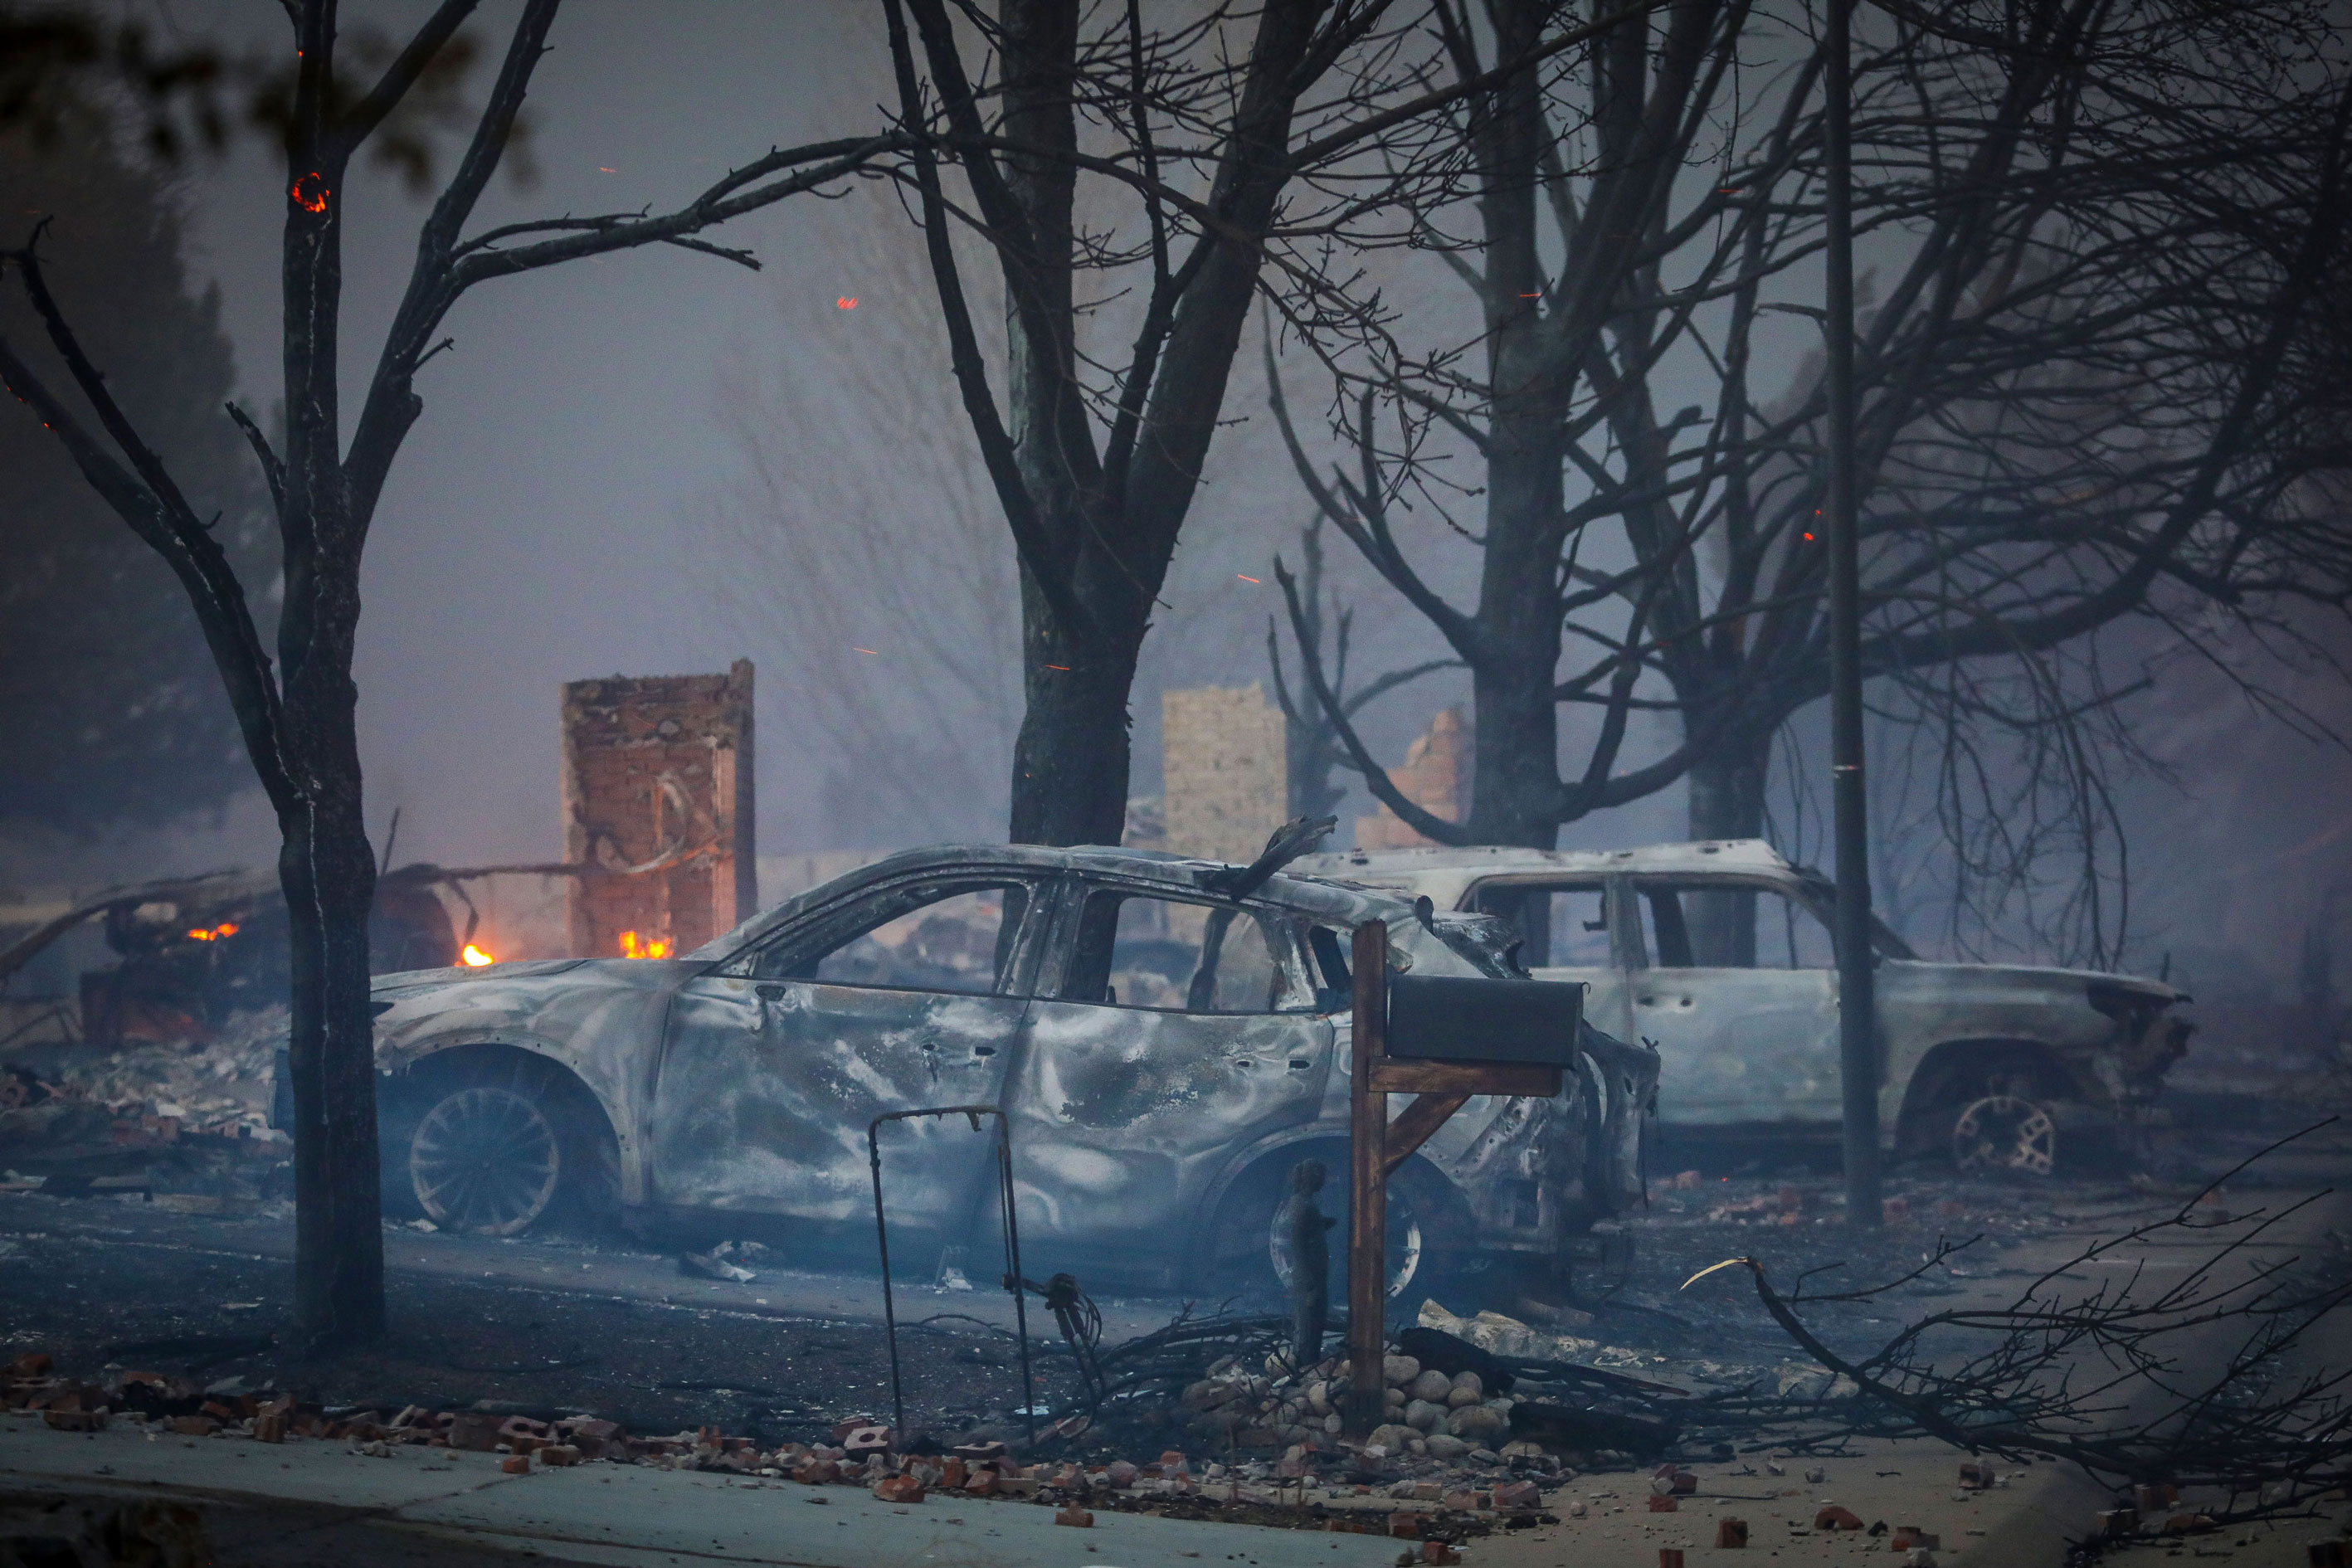 Burnt out vehicles sit amidst the smoke and haze after a fast moving wildfire swept through the area in the Centennial Heights neighborhood of Louisville, Colorado on December 30.